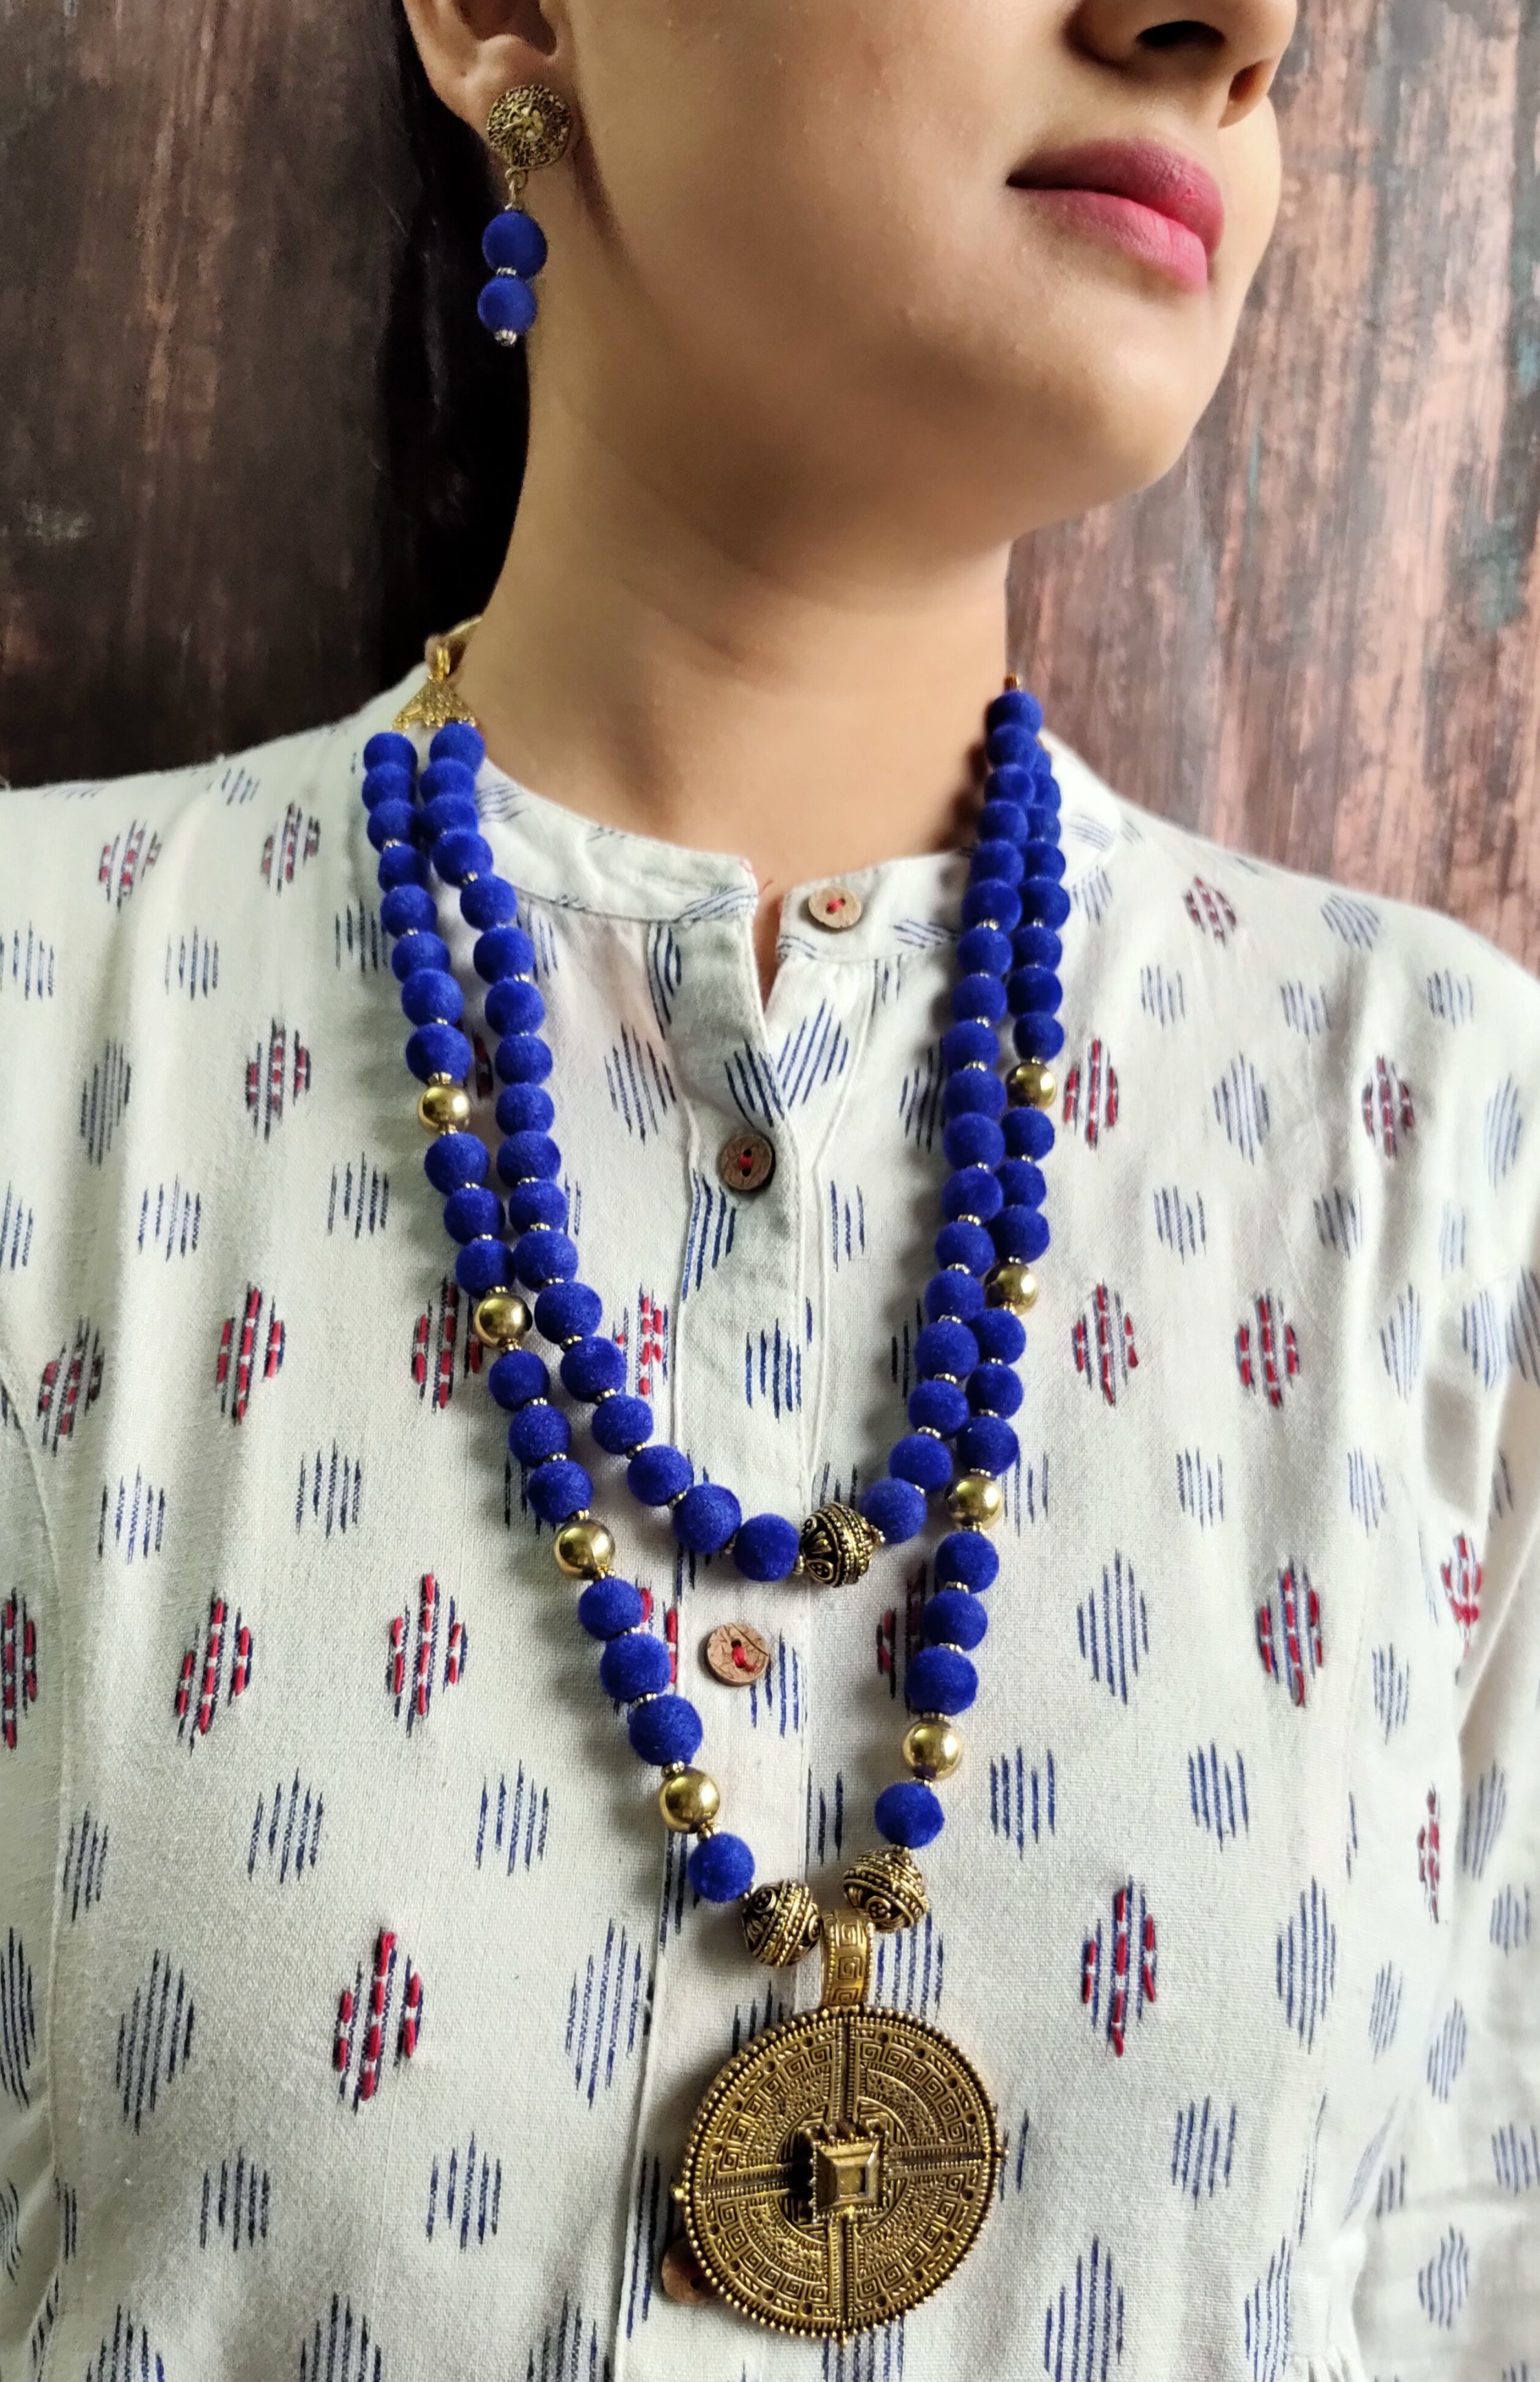 2 Layer Blue Fabric Beads Necklace Set with Antique Gold Finish Metal Pendant